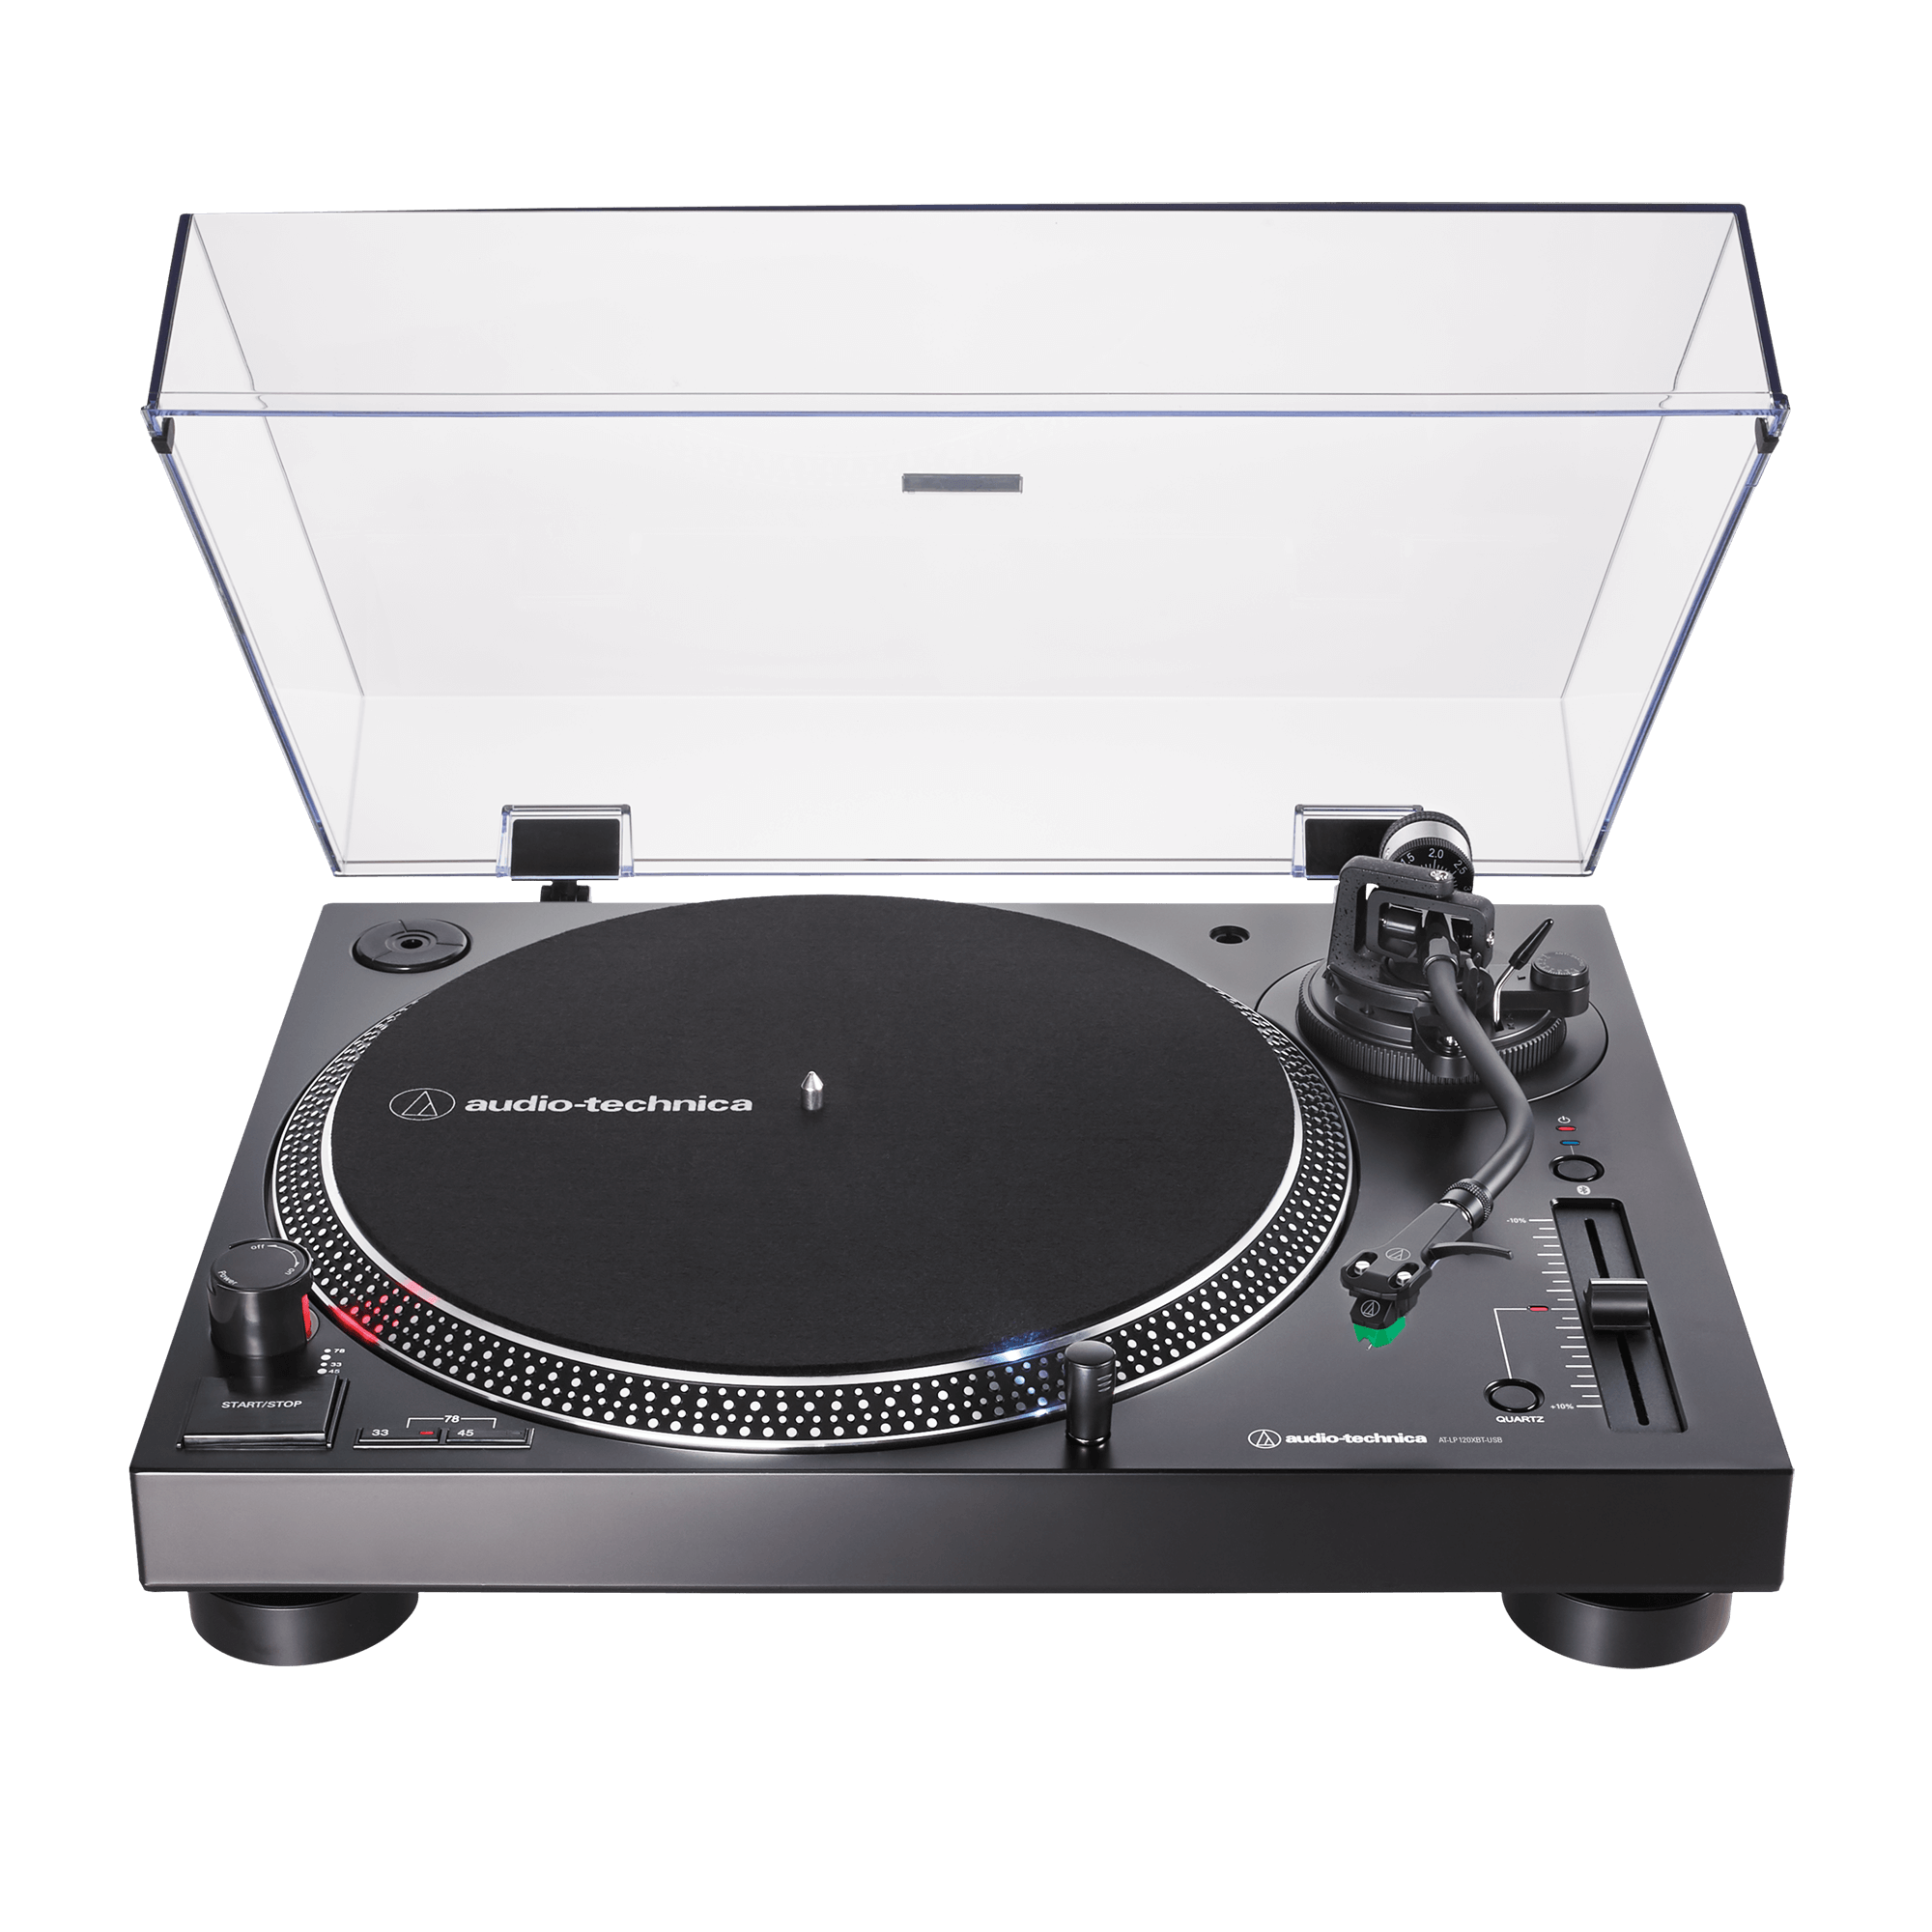 Audio technica lp60xbt • Compare & see prices now »